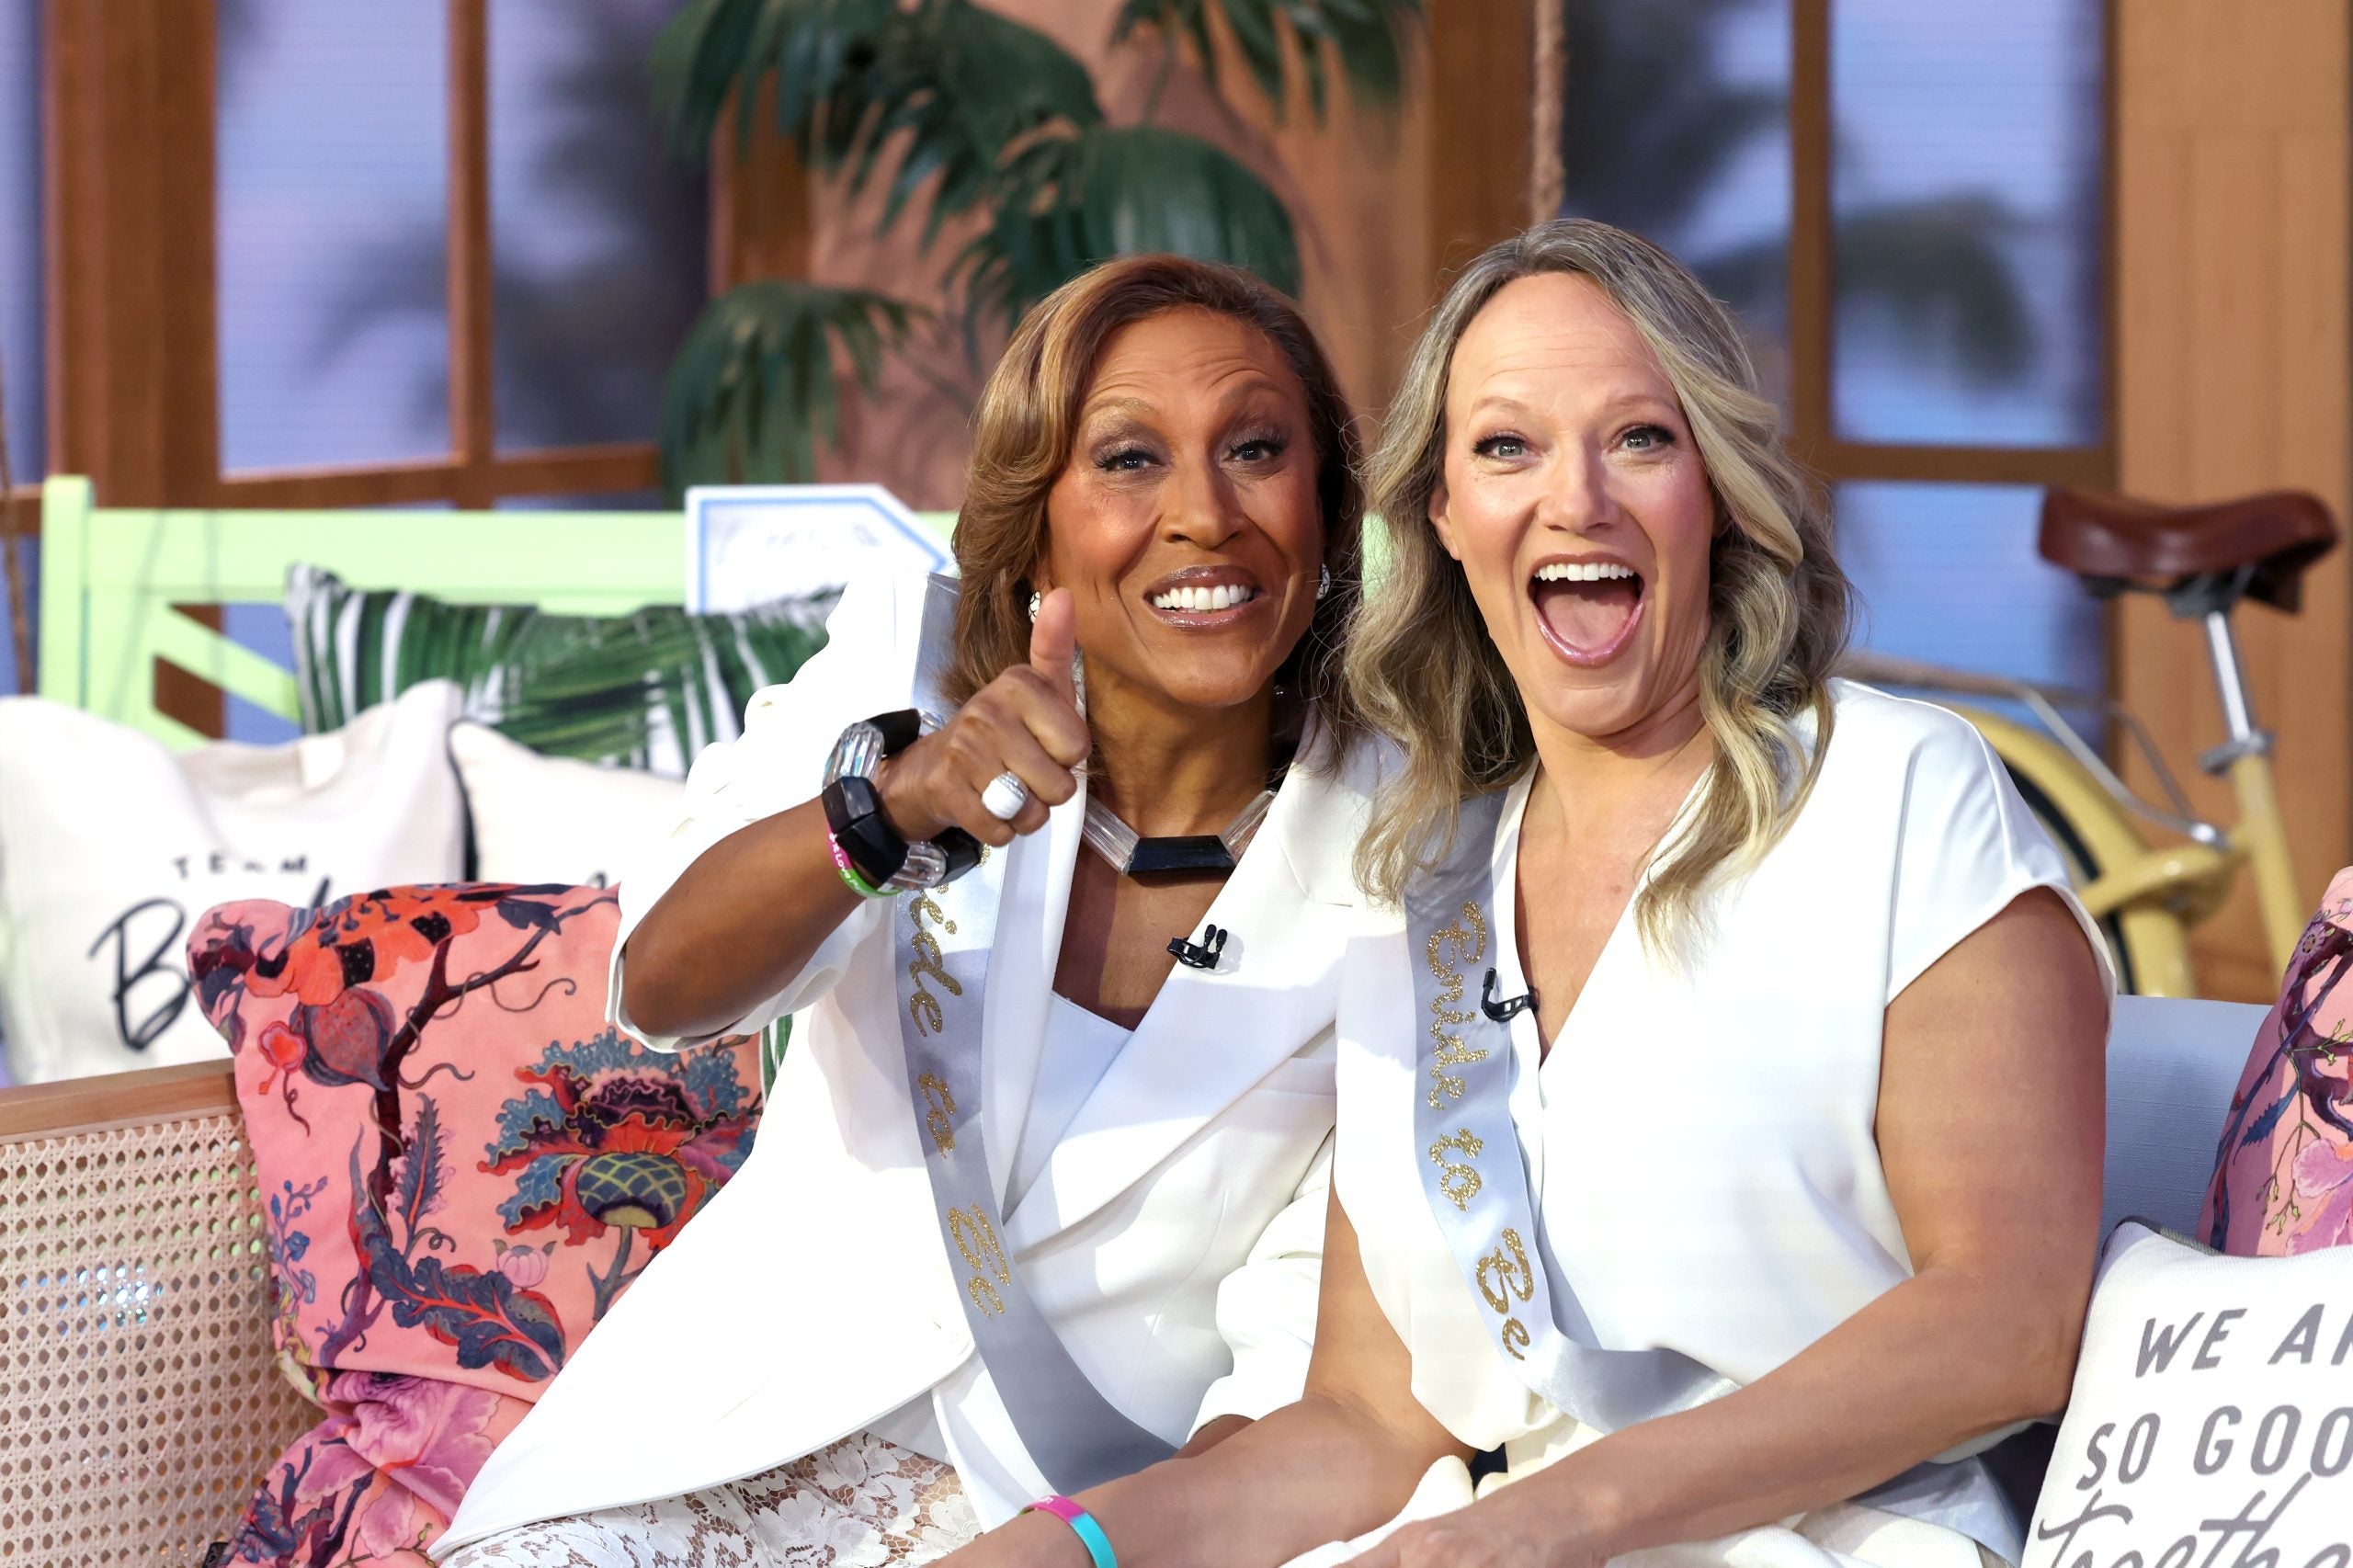 Robin Roberts And Fiancée Amber Laign Had A Joint Bachelorette Party Live On ‘Good Morning America’